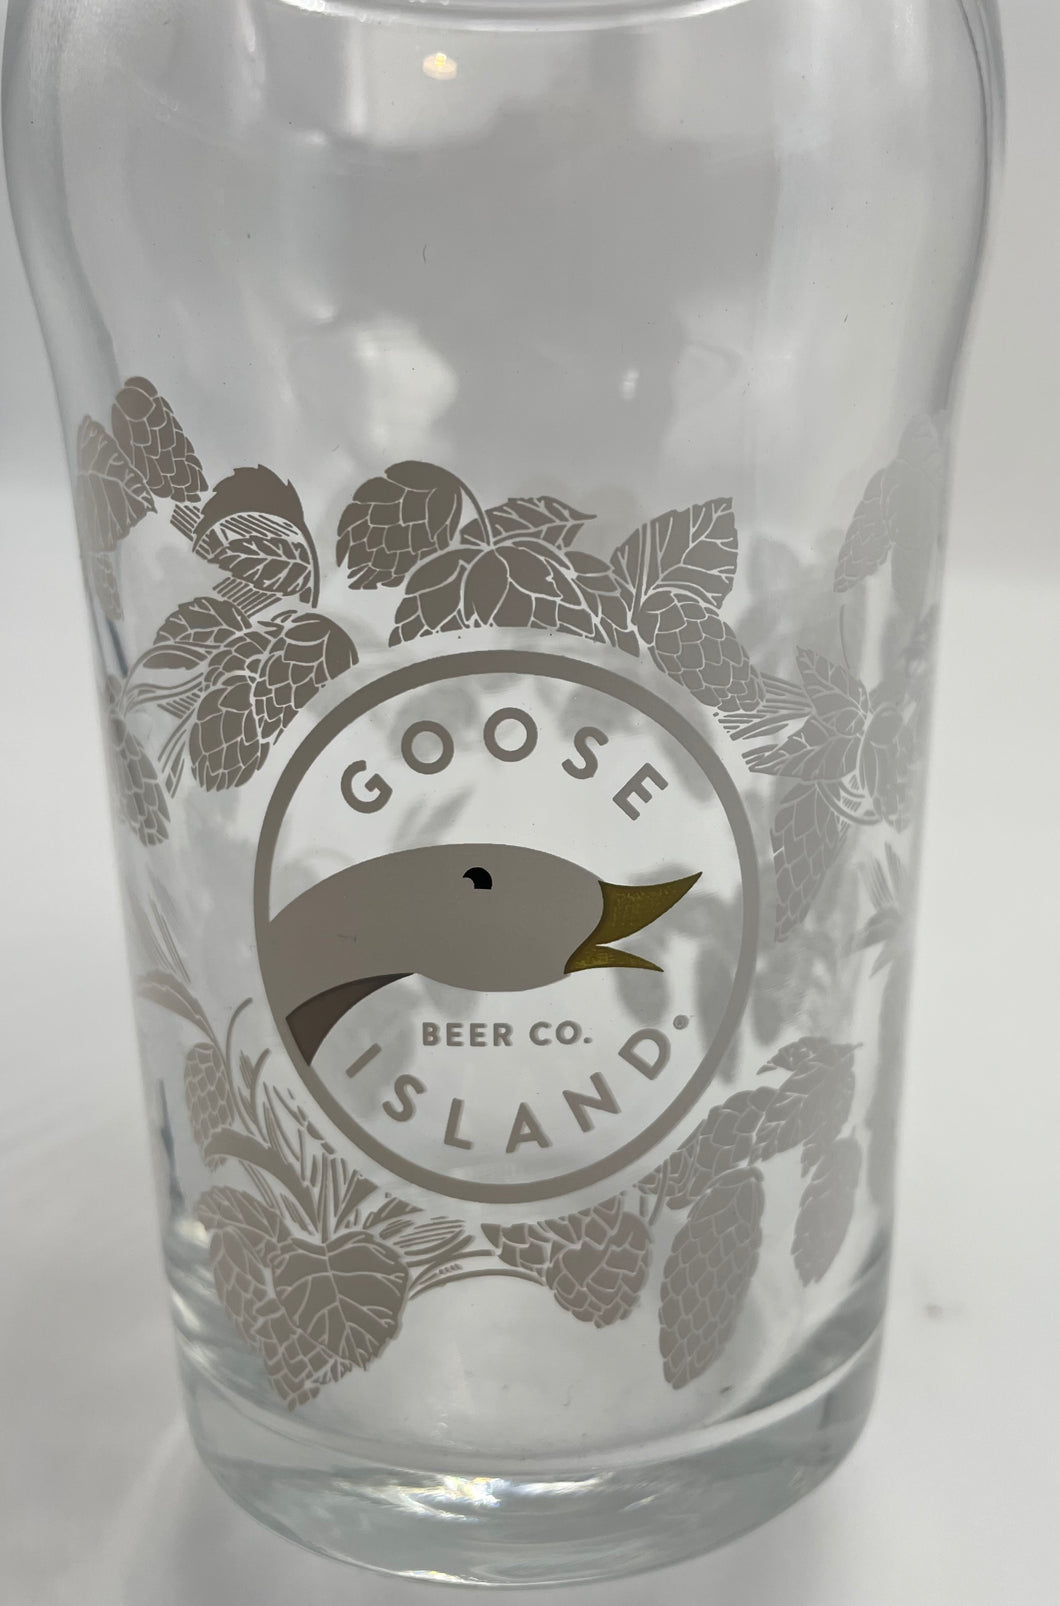 Goose island 20oz nucleated pint glass M20